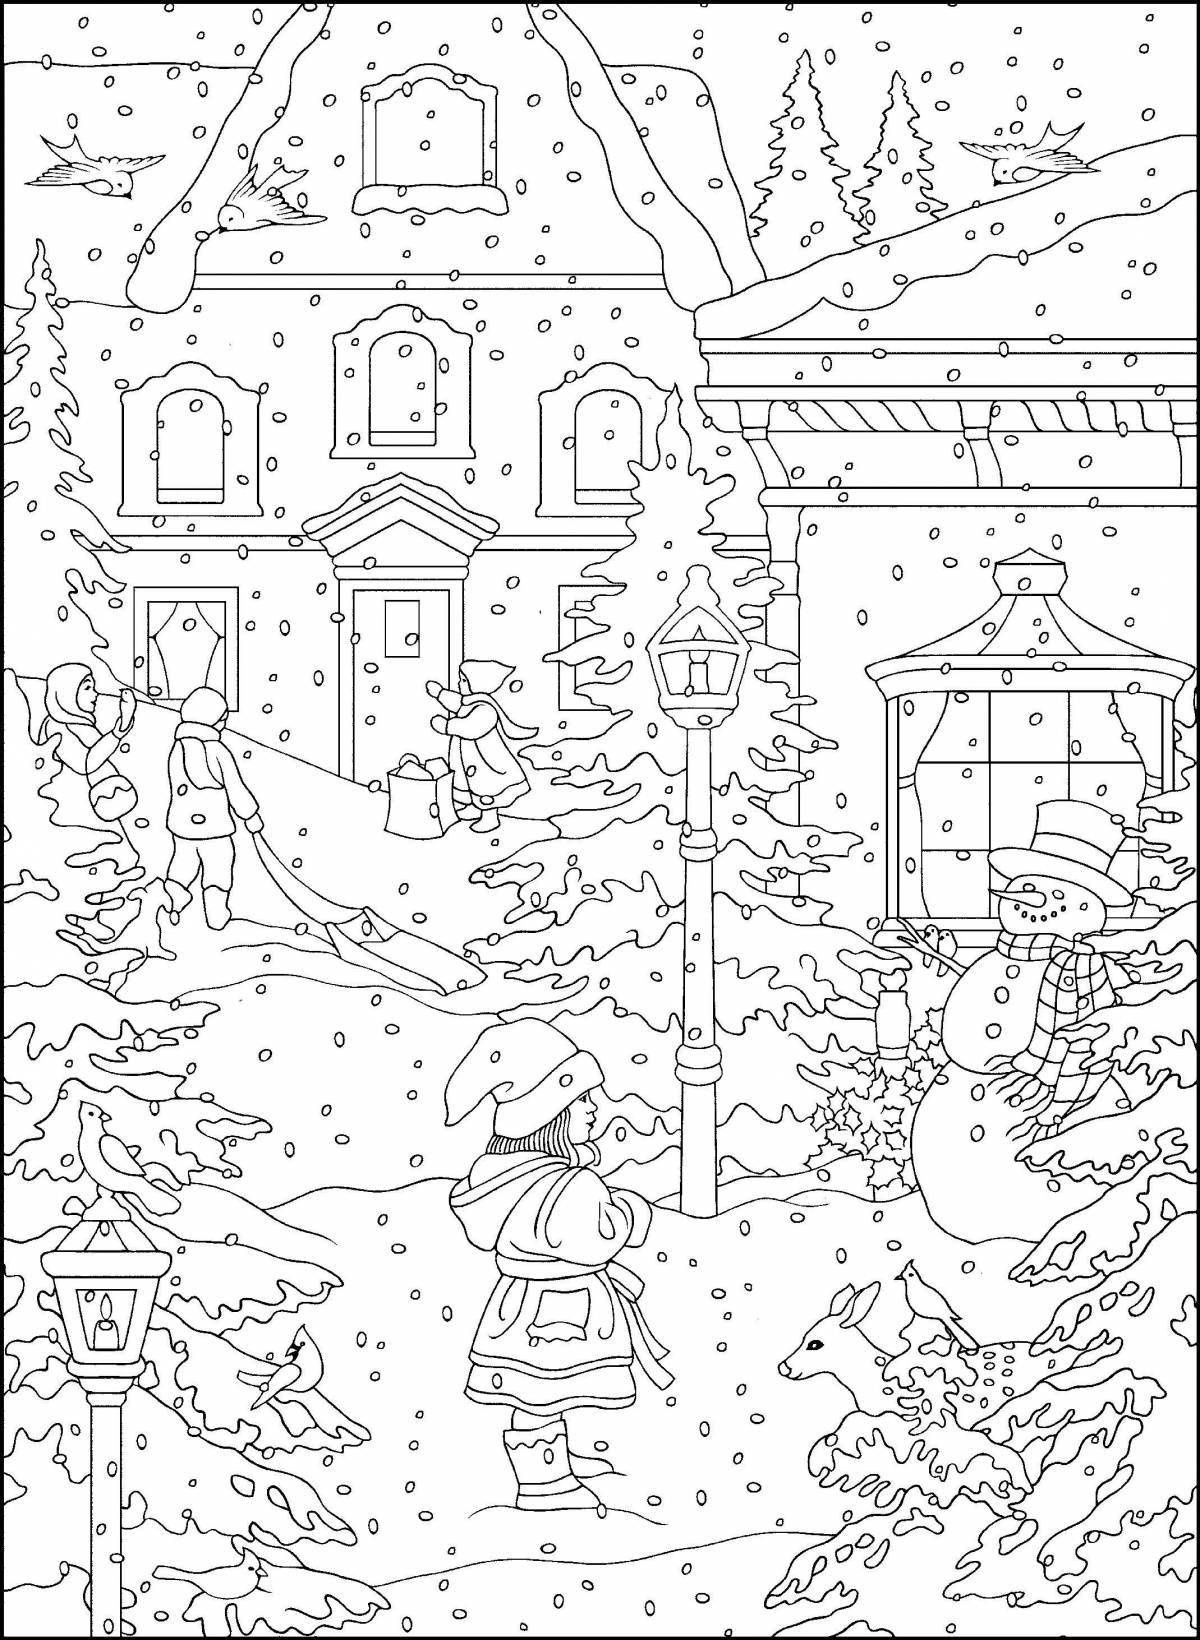 Great winter landscape coloring book for kids 6-7 years old